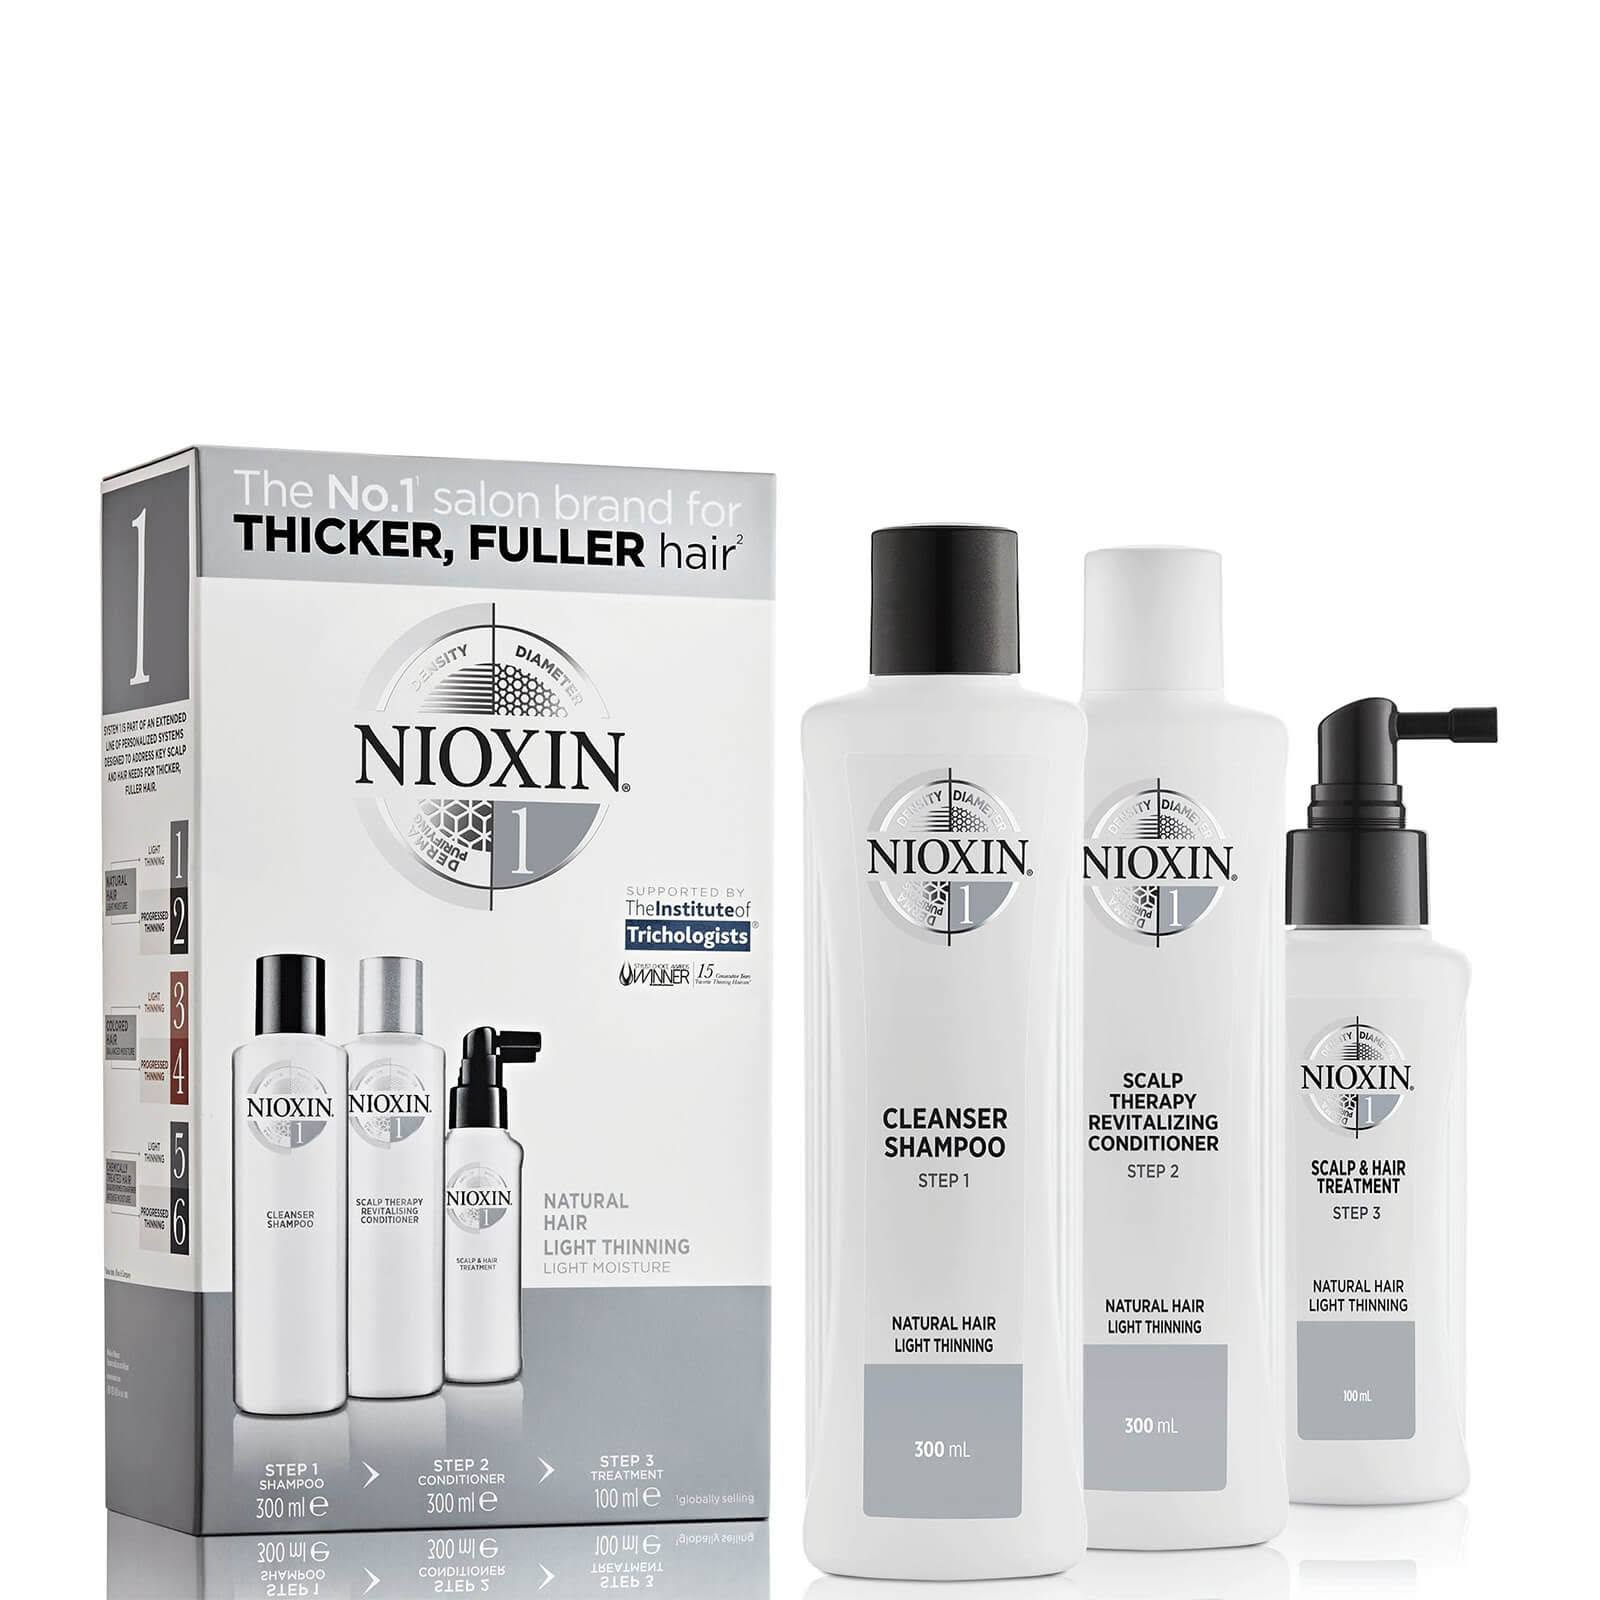 Nioxin system 1 kit for fine/normal to light thinning